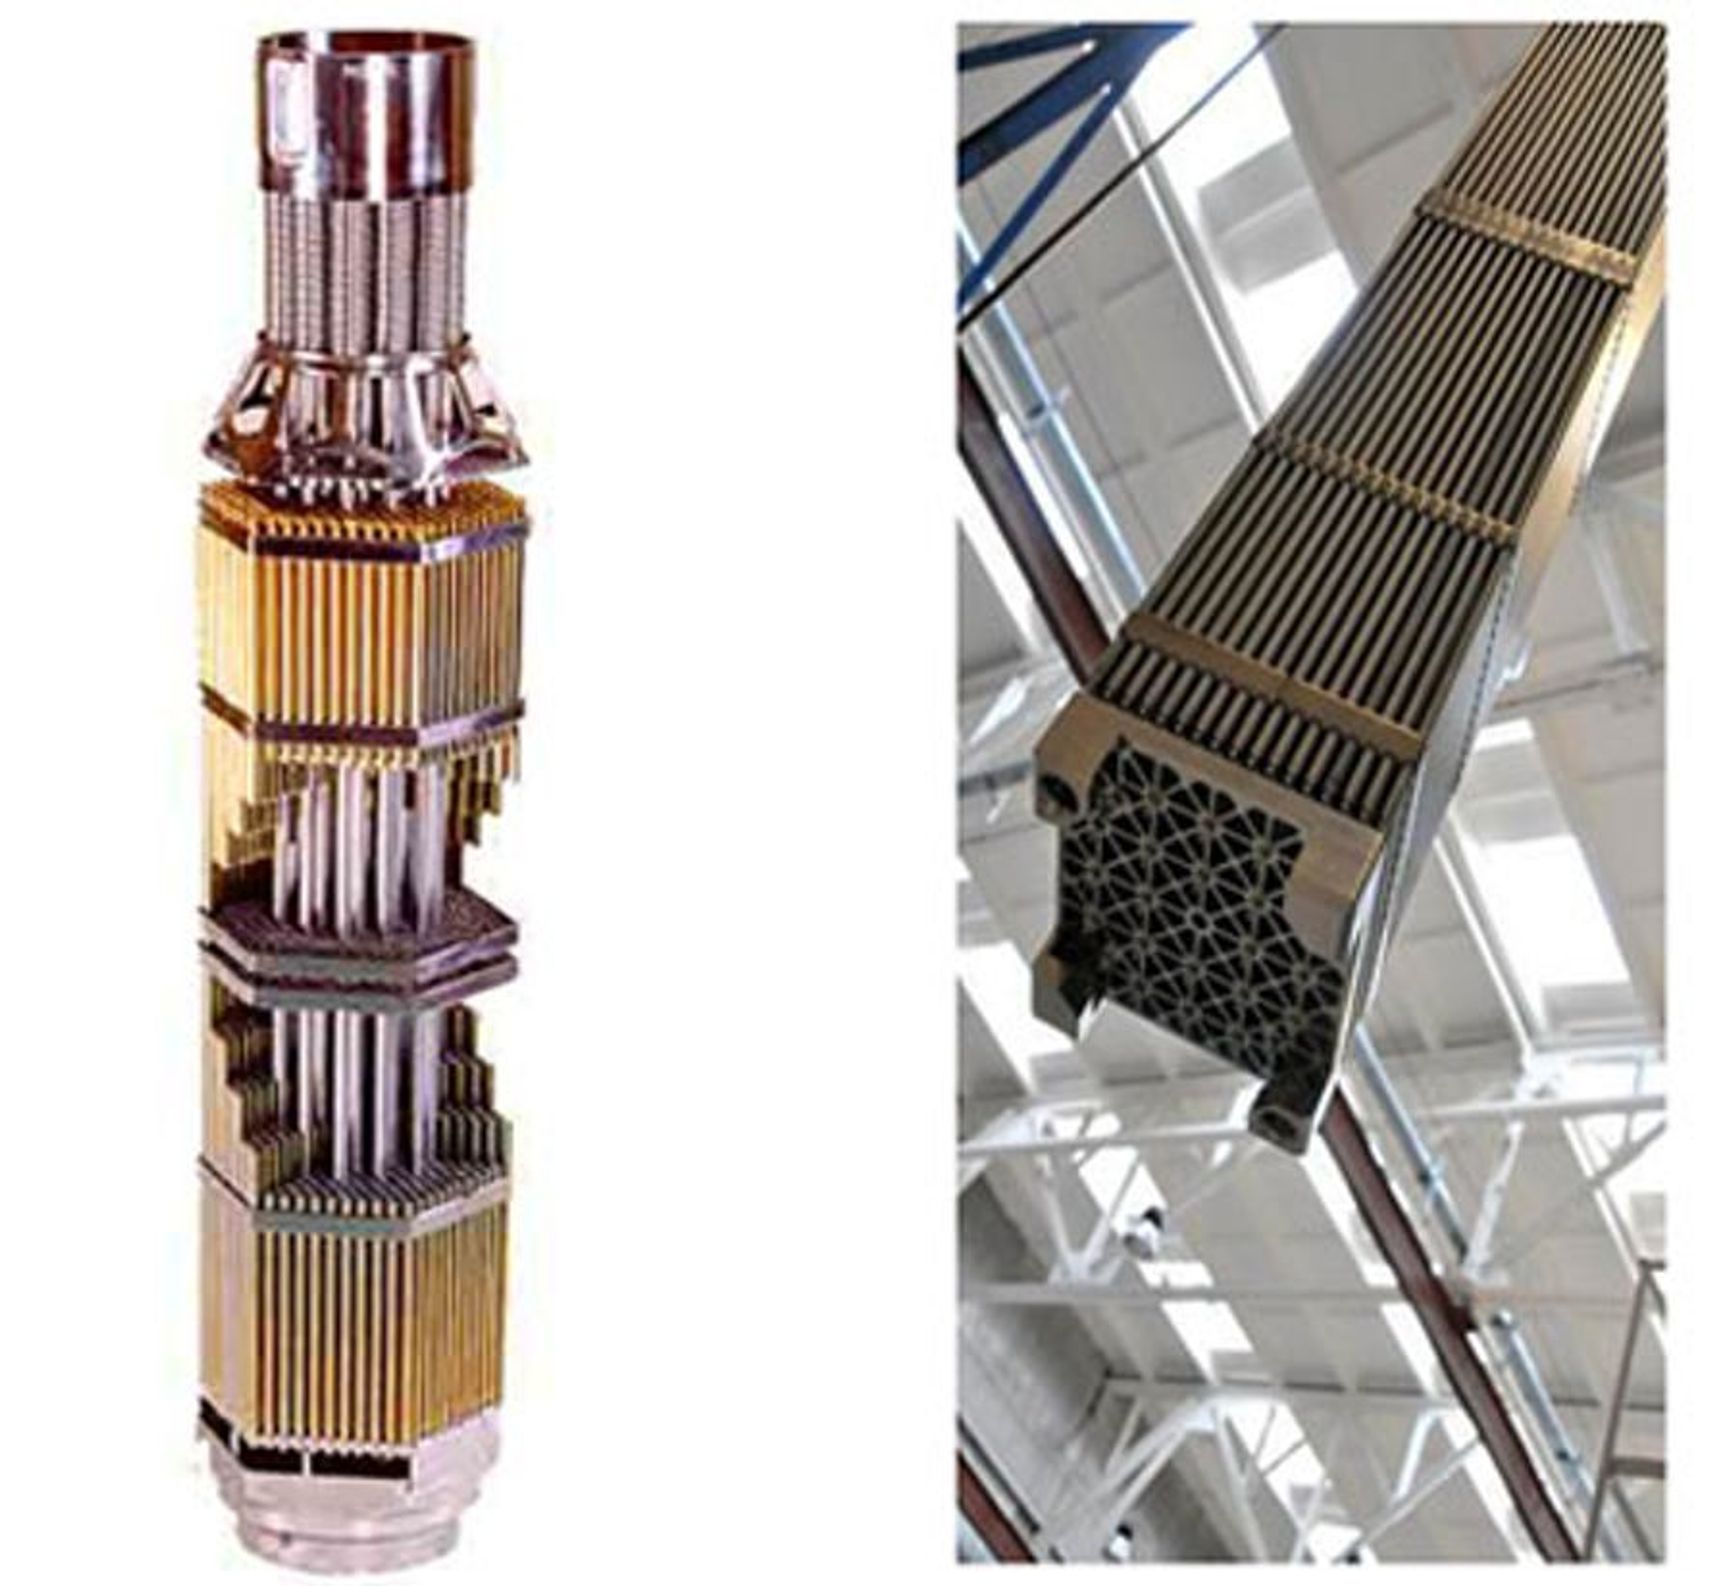 Fuel assemblies of Russian design and Westinghouse design